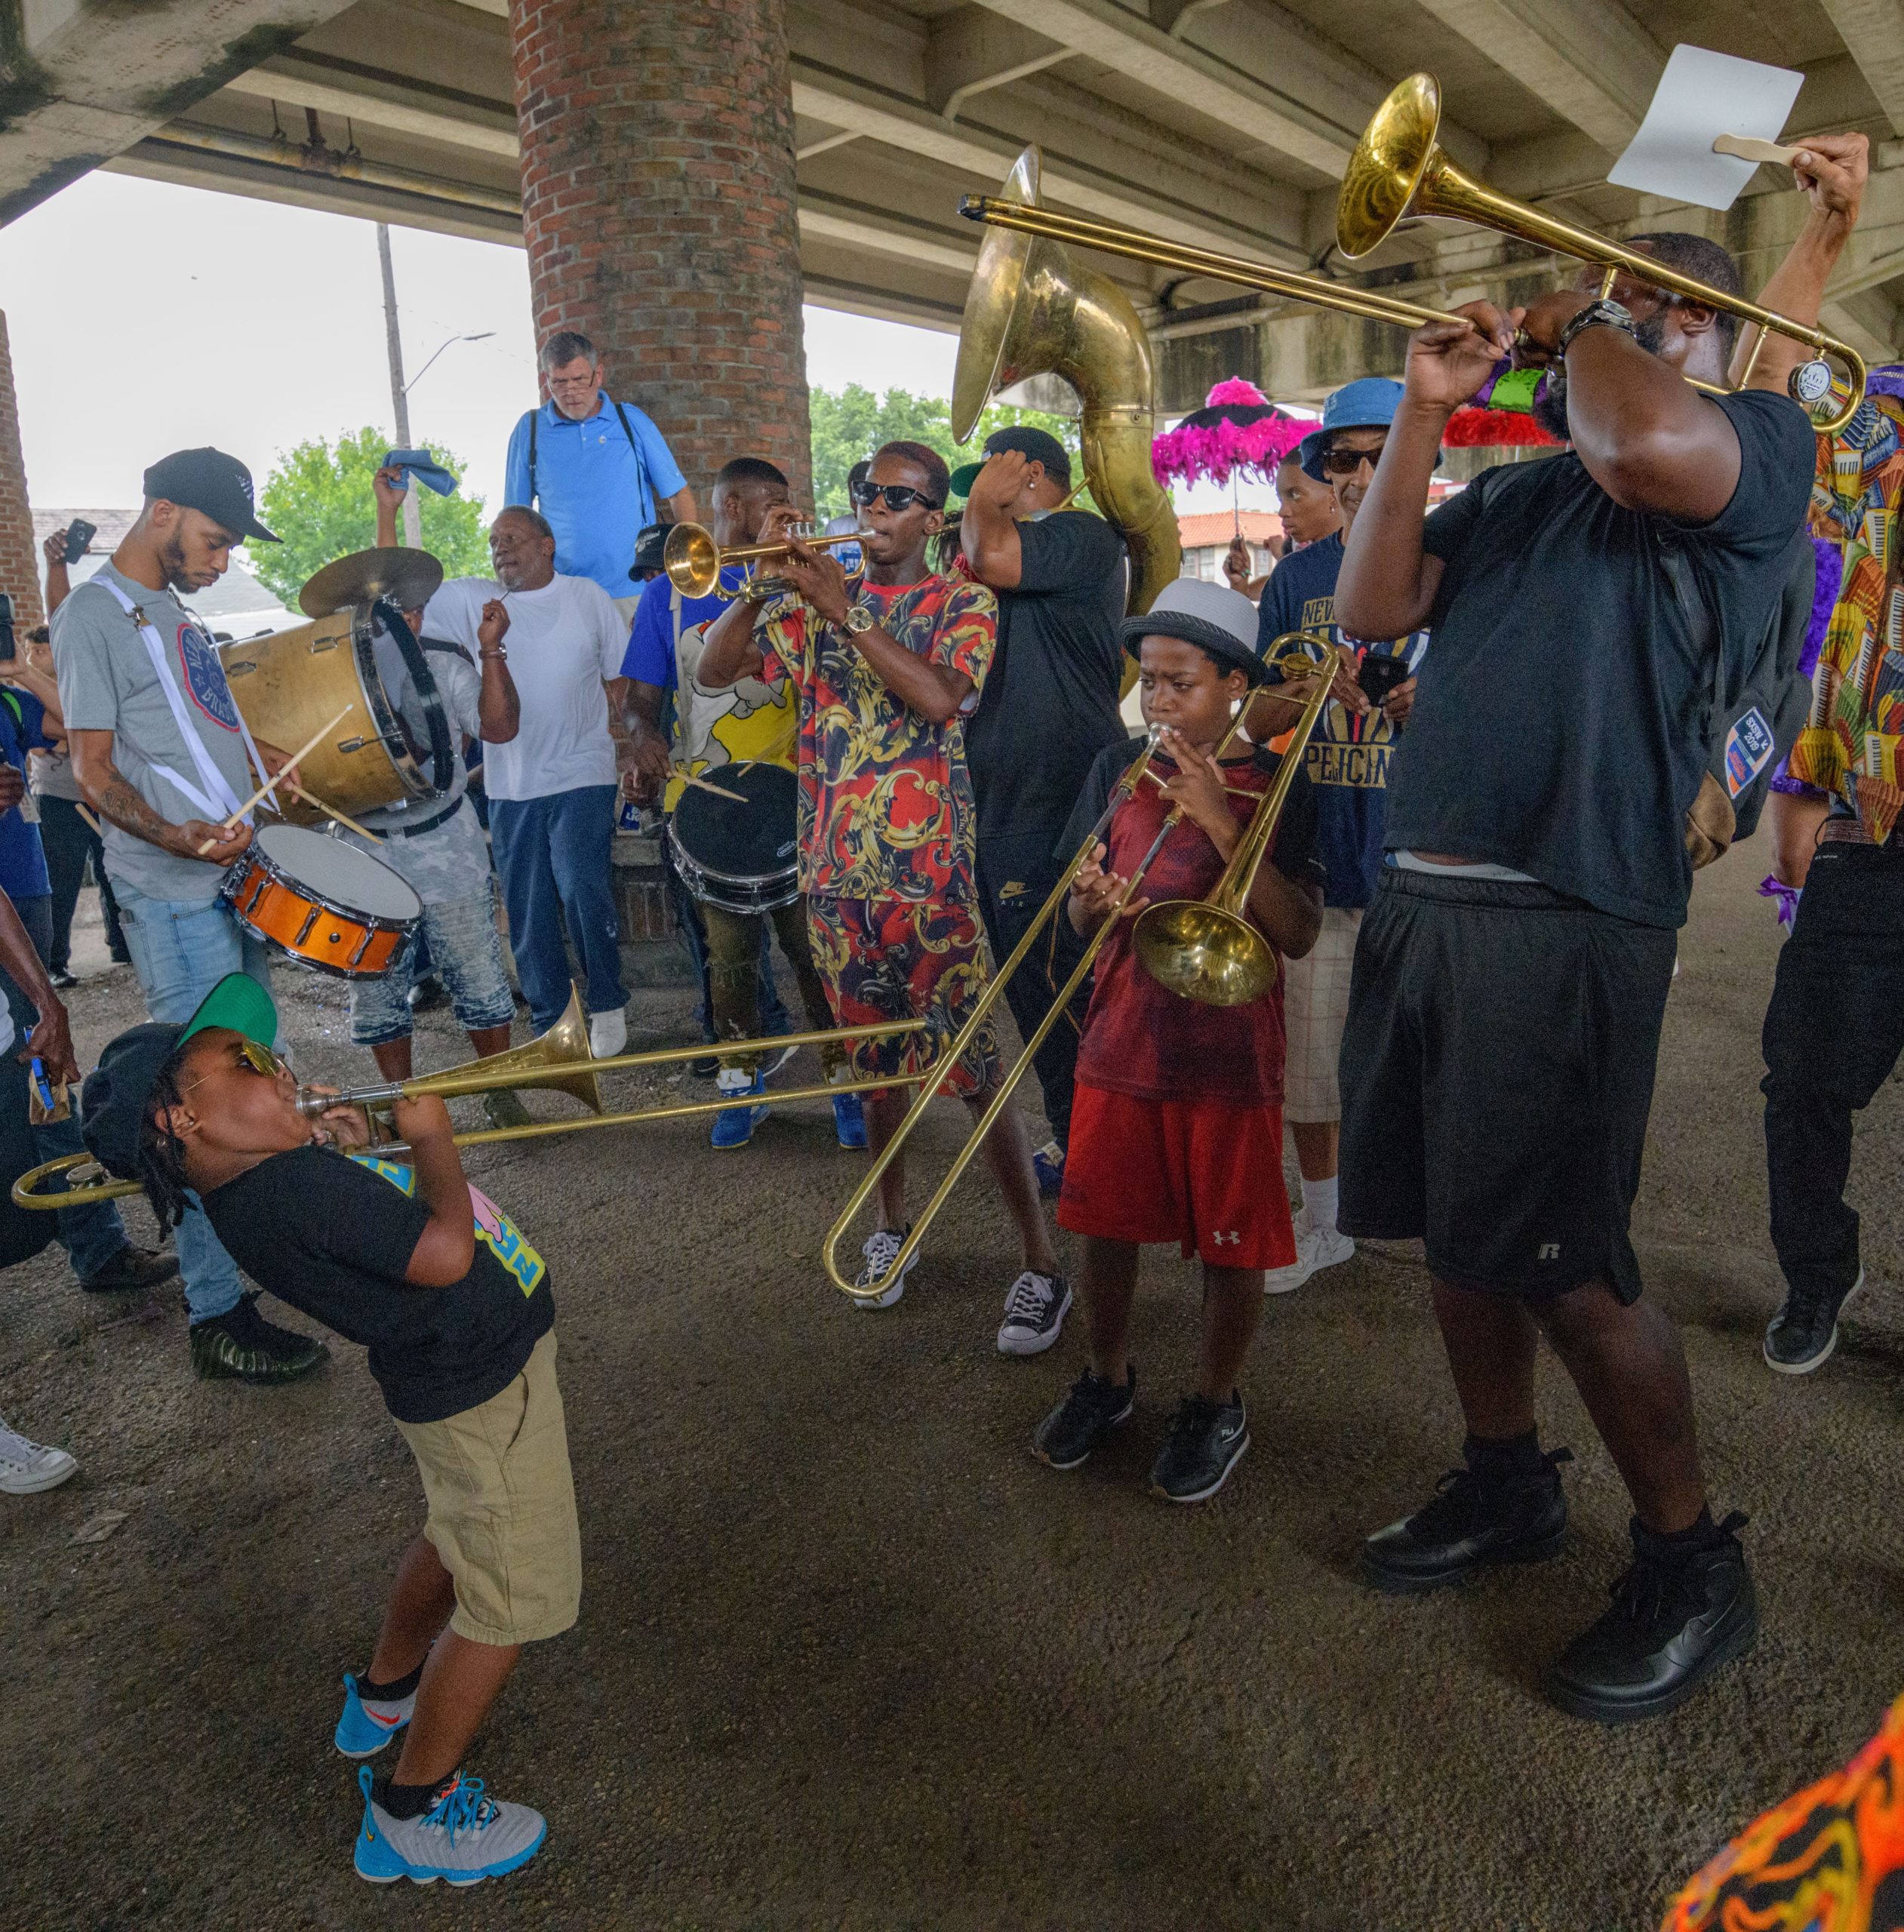 ‘Ain’t That a Shame’ on a ‘Blue Monday’ as mourners take part in a second line celebrating the life of Dave Bartholomew (December 24, 1918 - June 23, 2019) the architect of the New Orleans Sound as they parade from Kermit Ruffins’ Ernie K. Doe Mother-in-Law Lounge in the Treme neighborhood in New Orleans, La. Monday, June 24, 2019 with the TBC (To Be Continued) Brass Band. His son Don Bartholomew and grandchildren Christopher, Don, Jr., Blake, and India Bartholomew were also present to honor the family patriarch who passed at age 100 Sunday and was the producer and co-writer of many of the hits of Fats Domino (February 26, 1928 – October 24, 2017) including ‘Blue Monday’ and ‘Ain’t That a Shame.’ He co-wrote 'The Fat Man' with Domino which is considered one of, if not the first, Rock ’n’ Roll records and Bartholomew was also inducted in the Rock and Roll Hall of Fame. Photo by Matthew Hinton